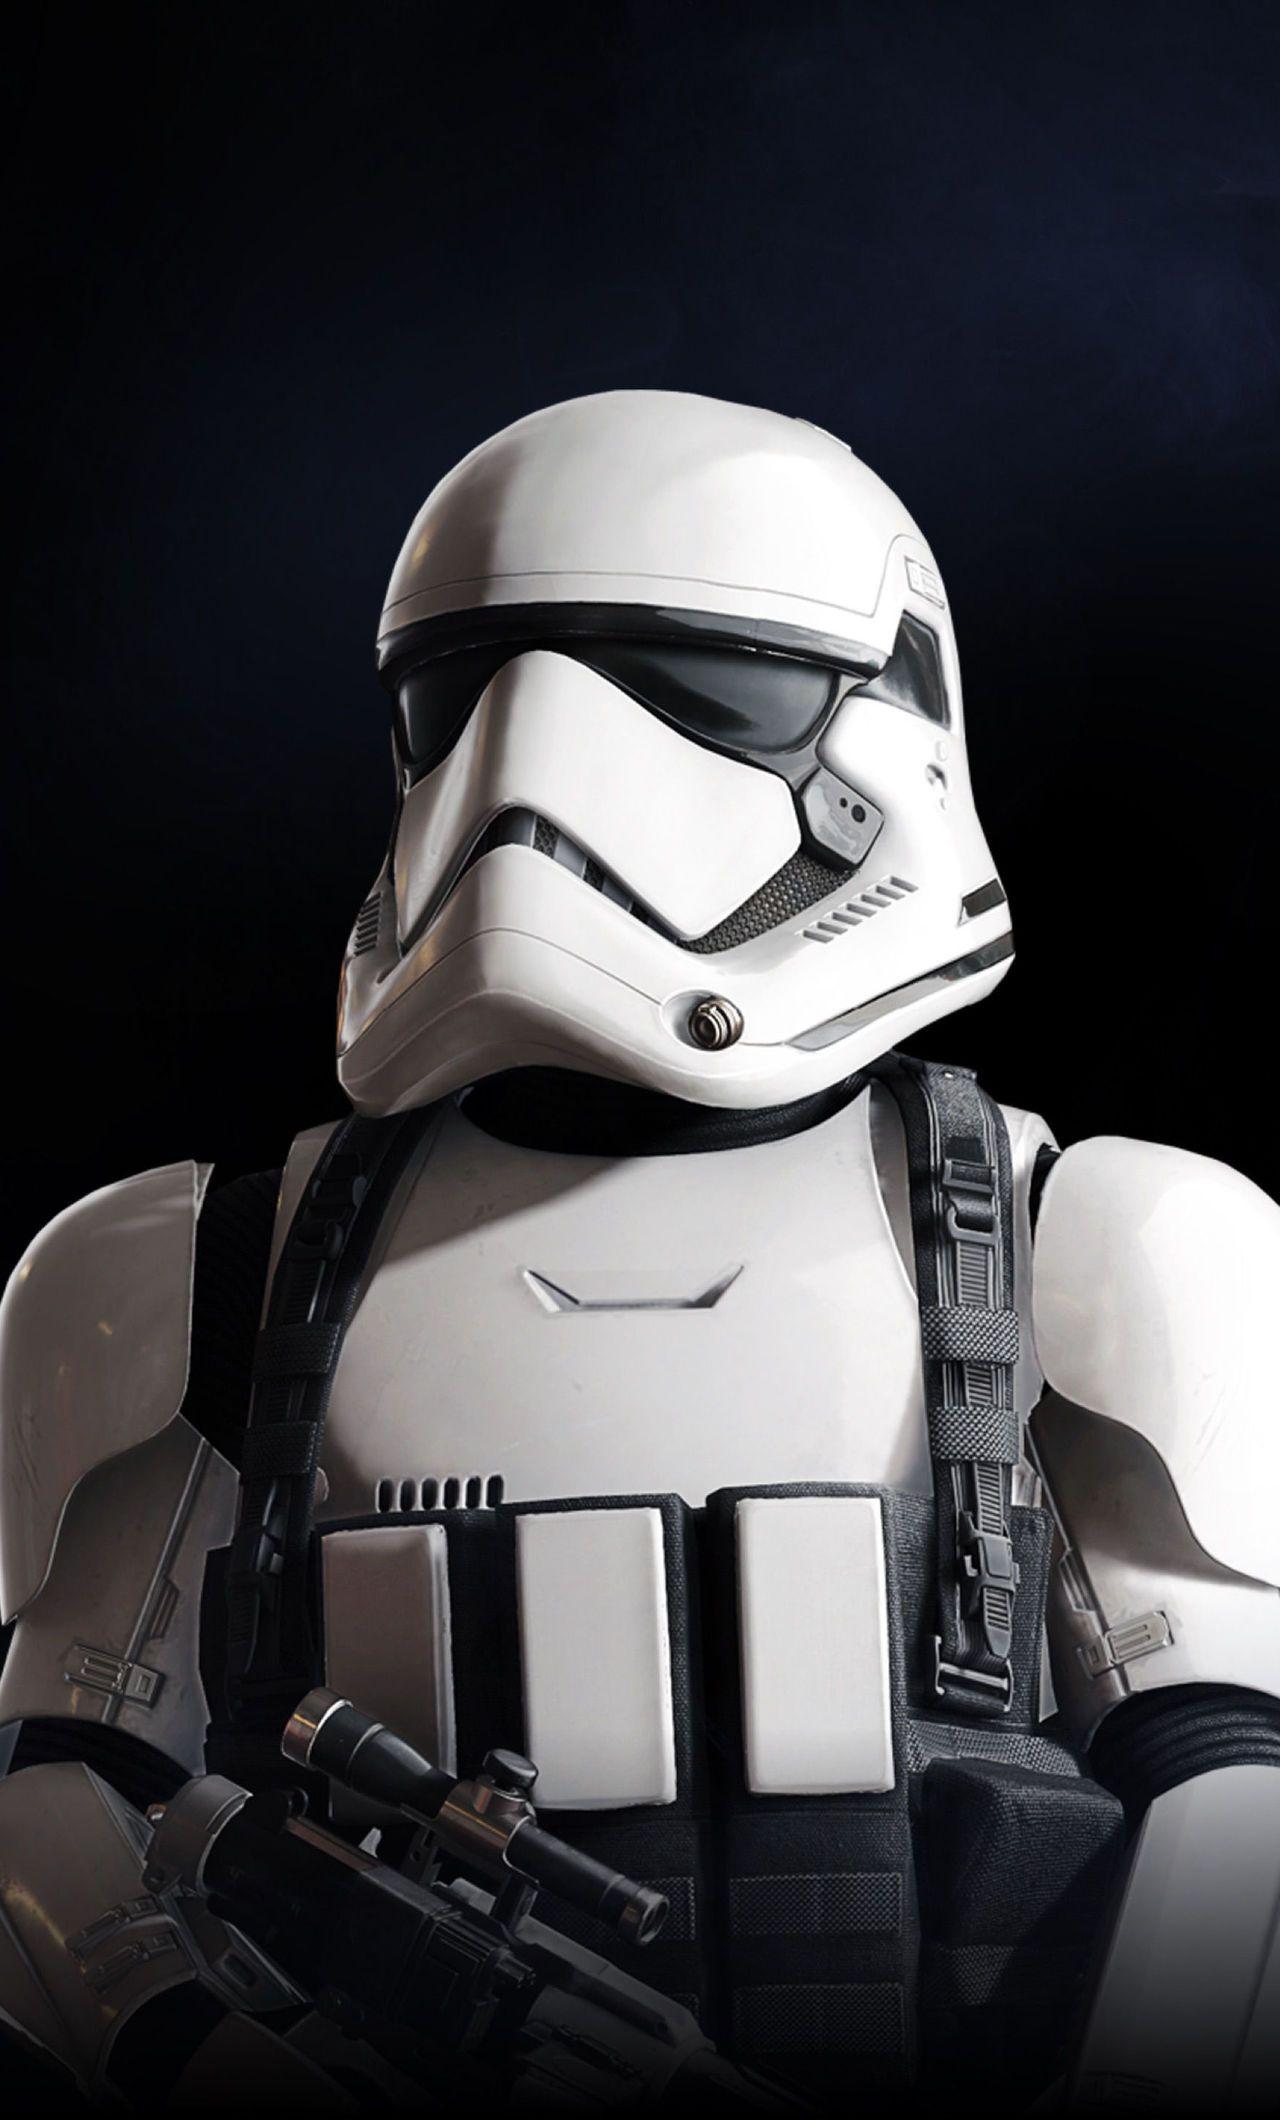 Download wallpaper 840x1336 stormtrooper star wars 2020 art iphone 5  iphone 5s iphone 5c ipod touch 840x1336 hd background 26472